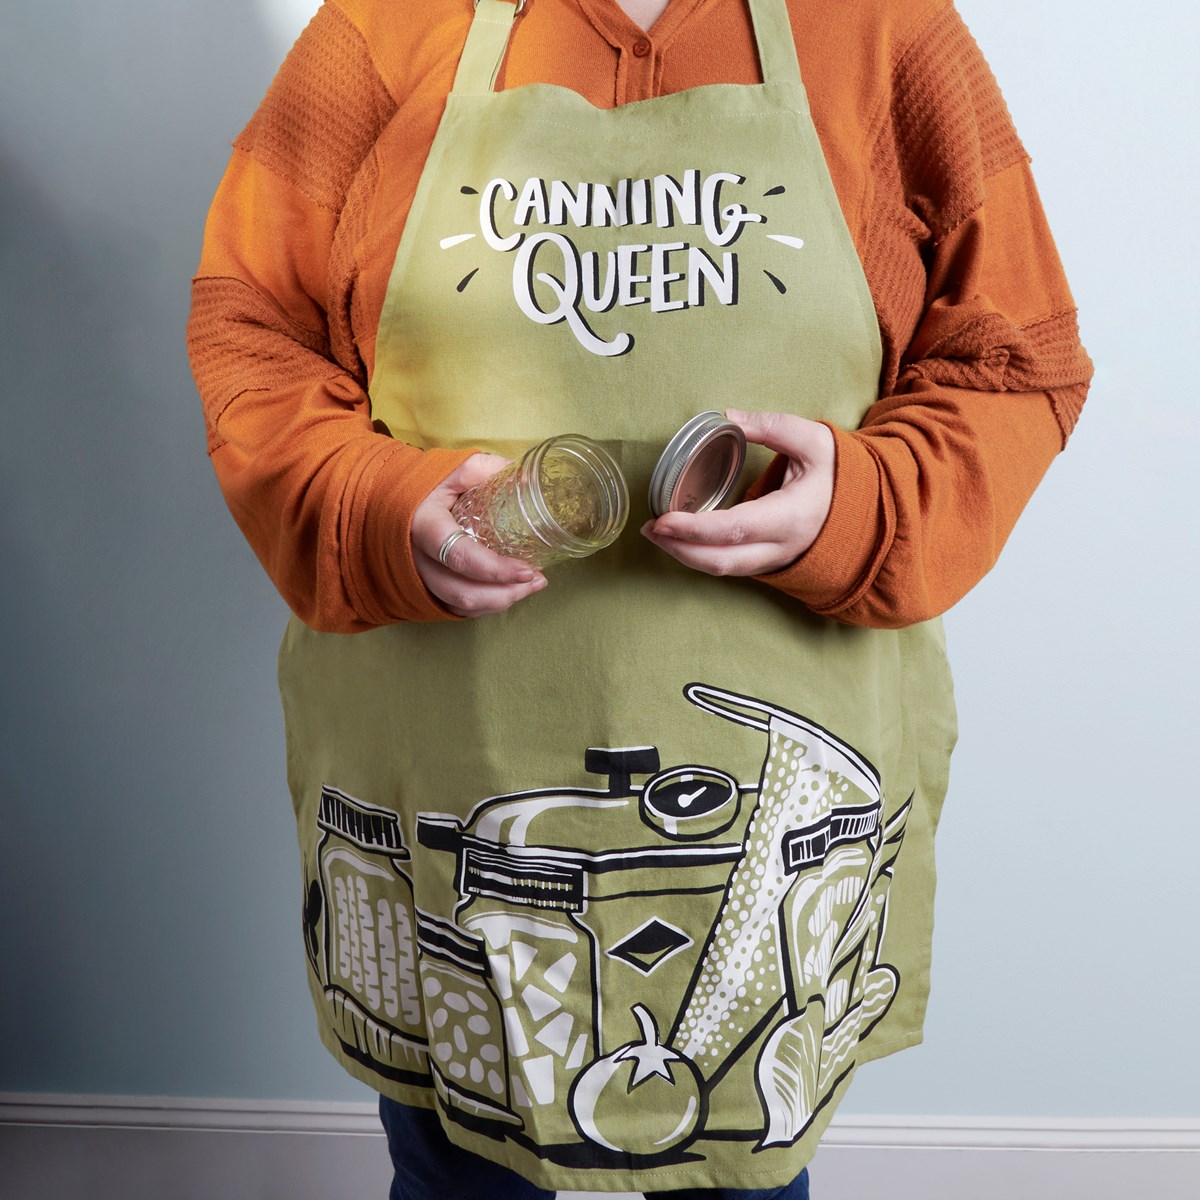 Canning Queen Apron - Cotton, Metal